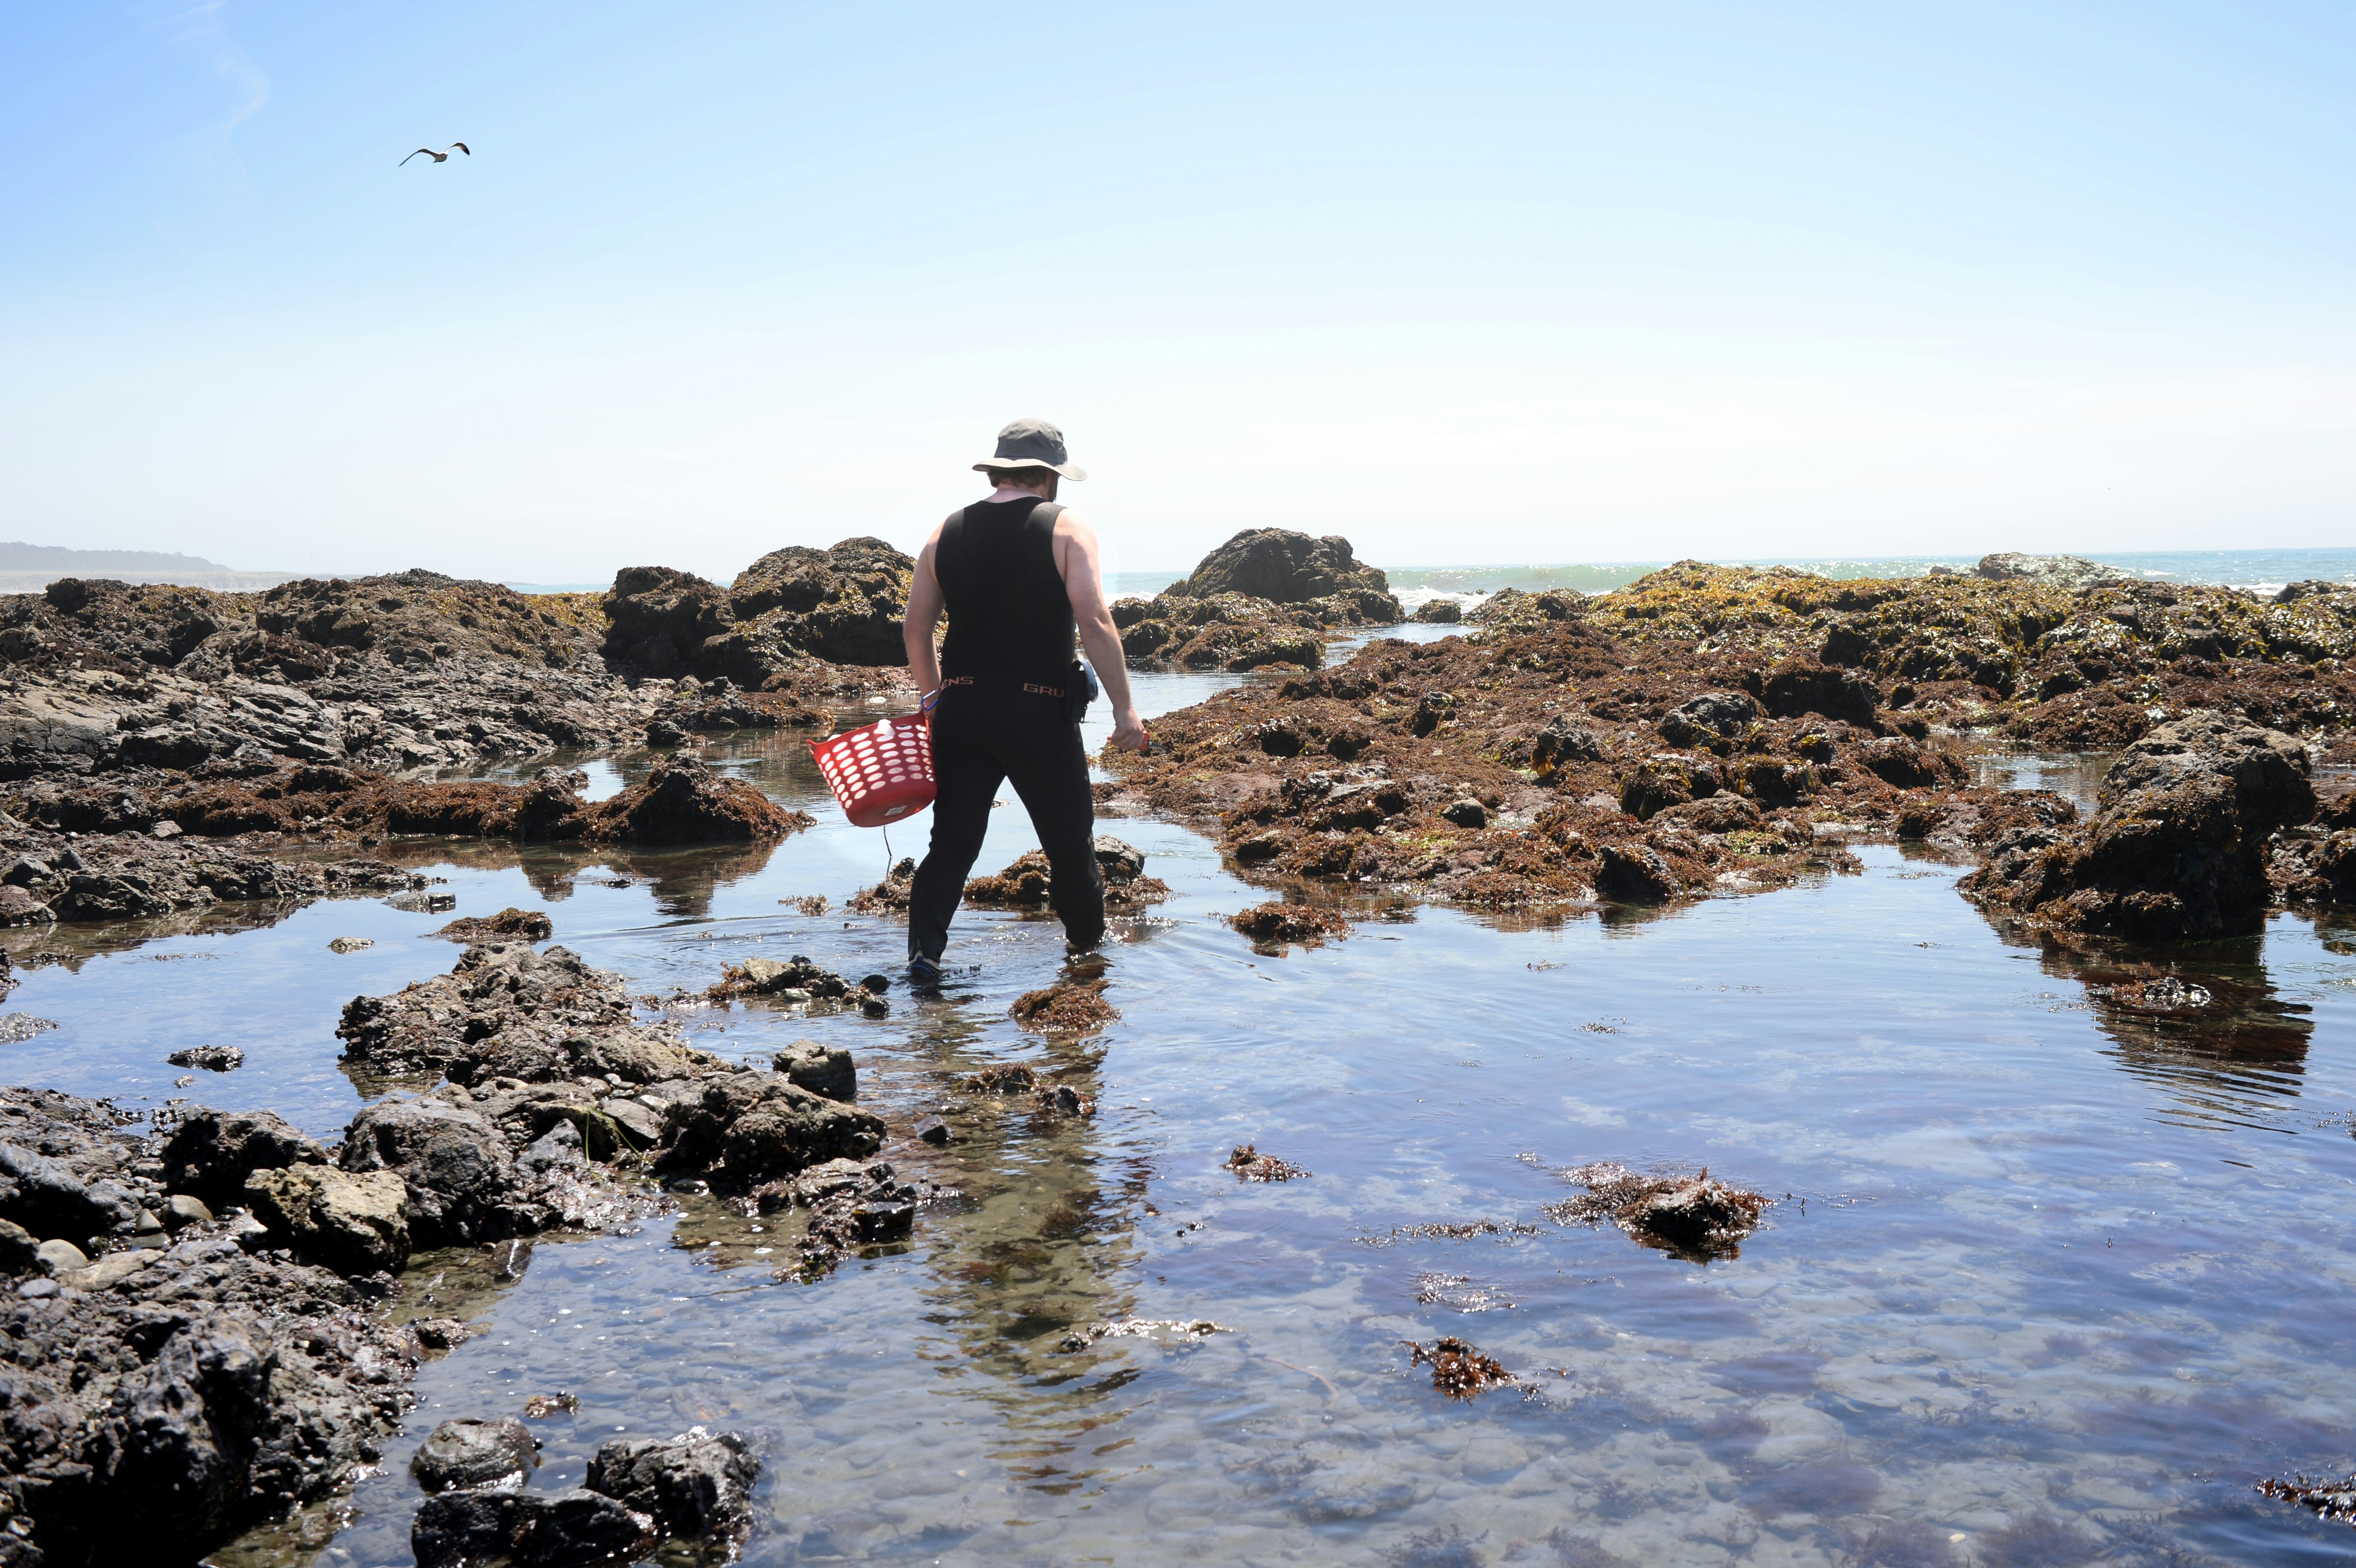 A man wearing a sunhat carrying a bucket walks by the sea shore, looking intently at tidepools